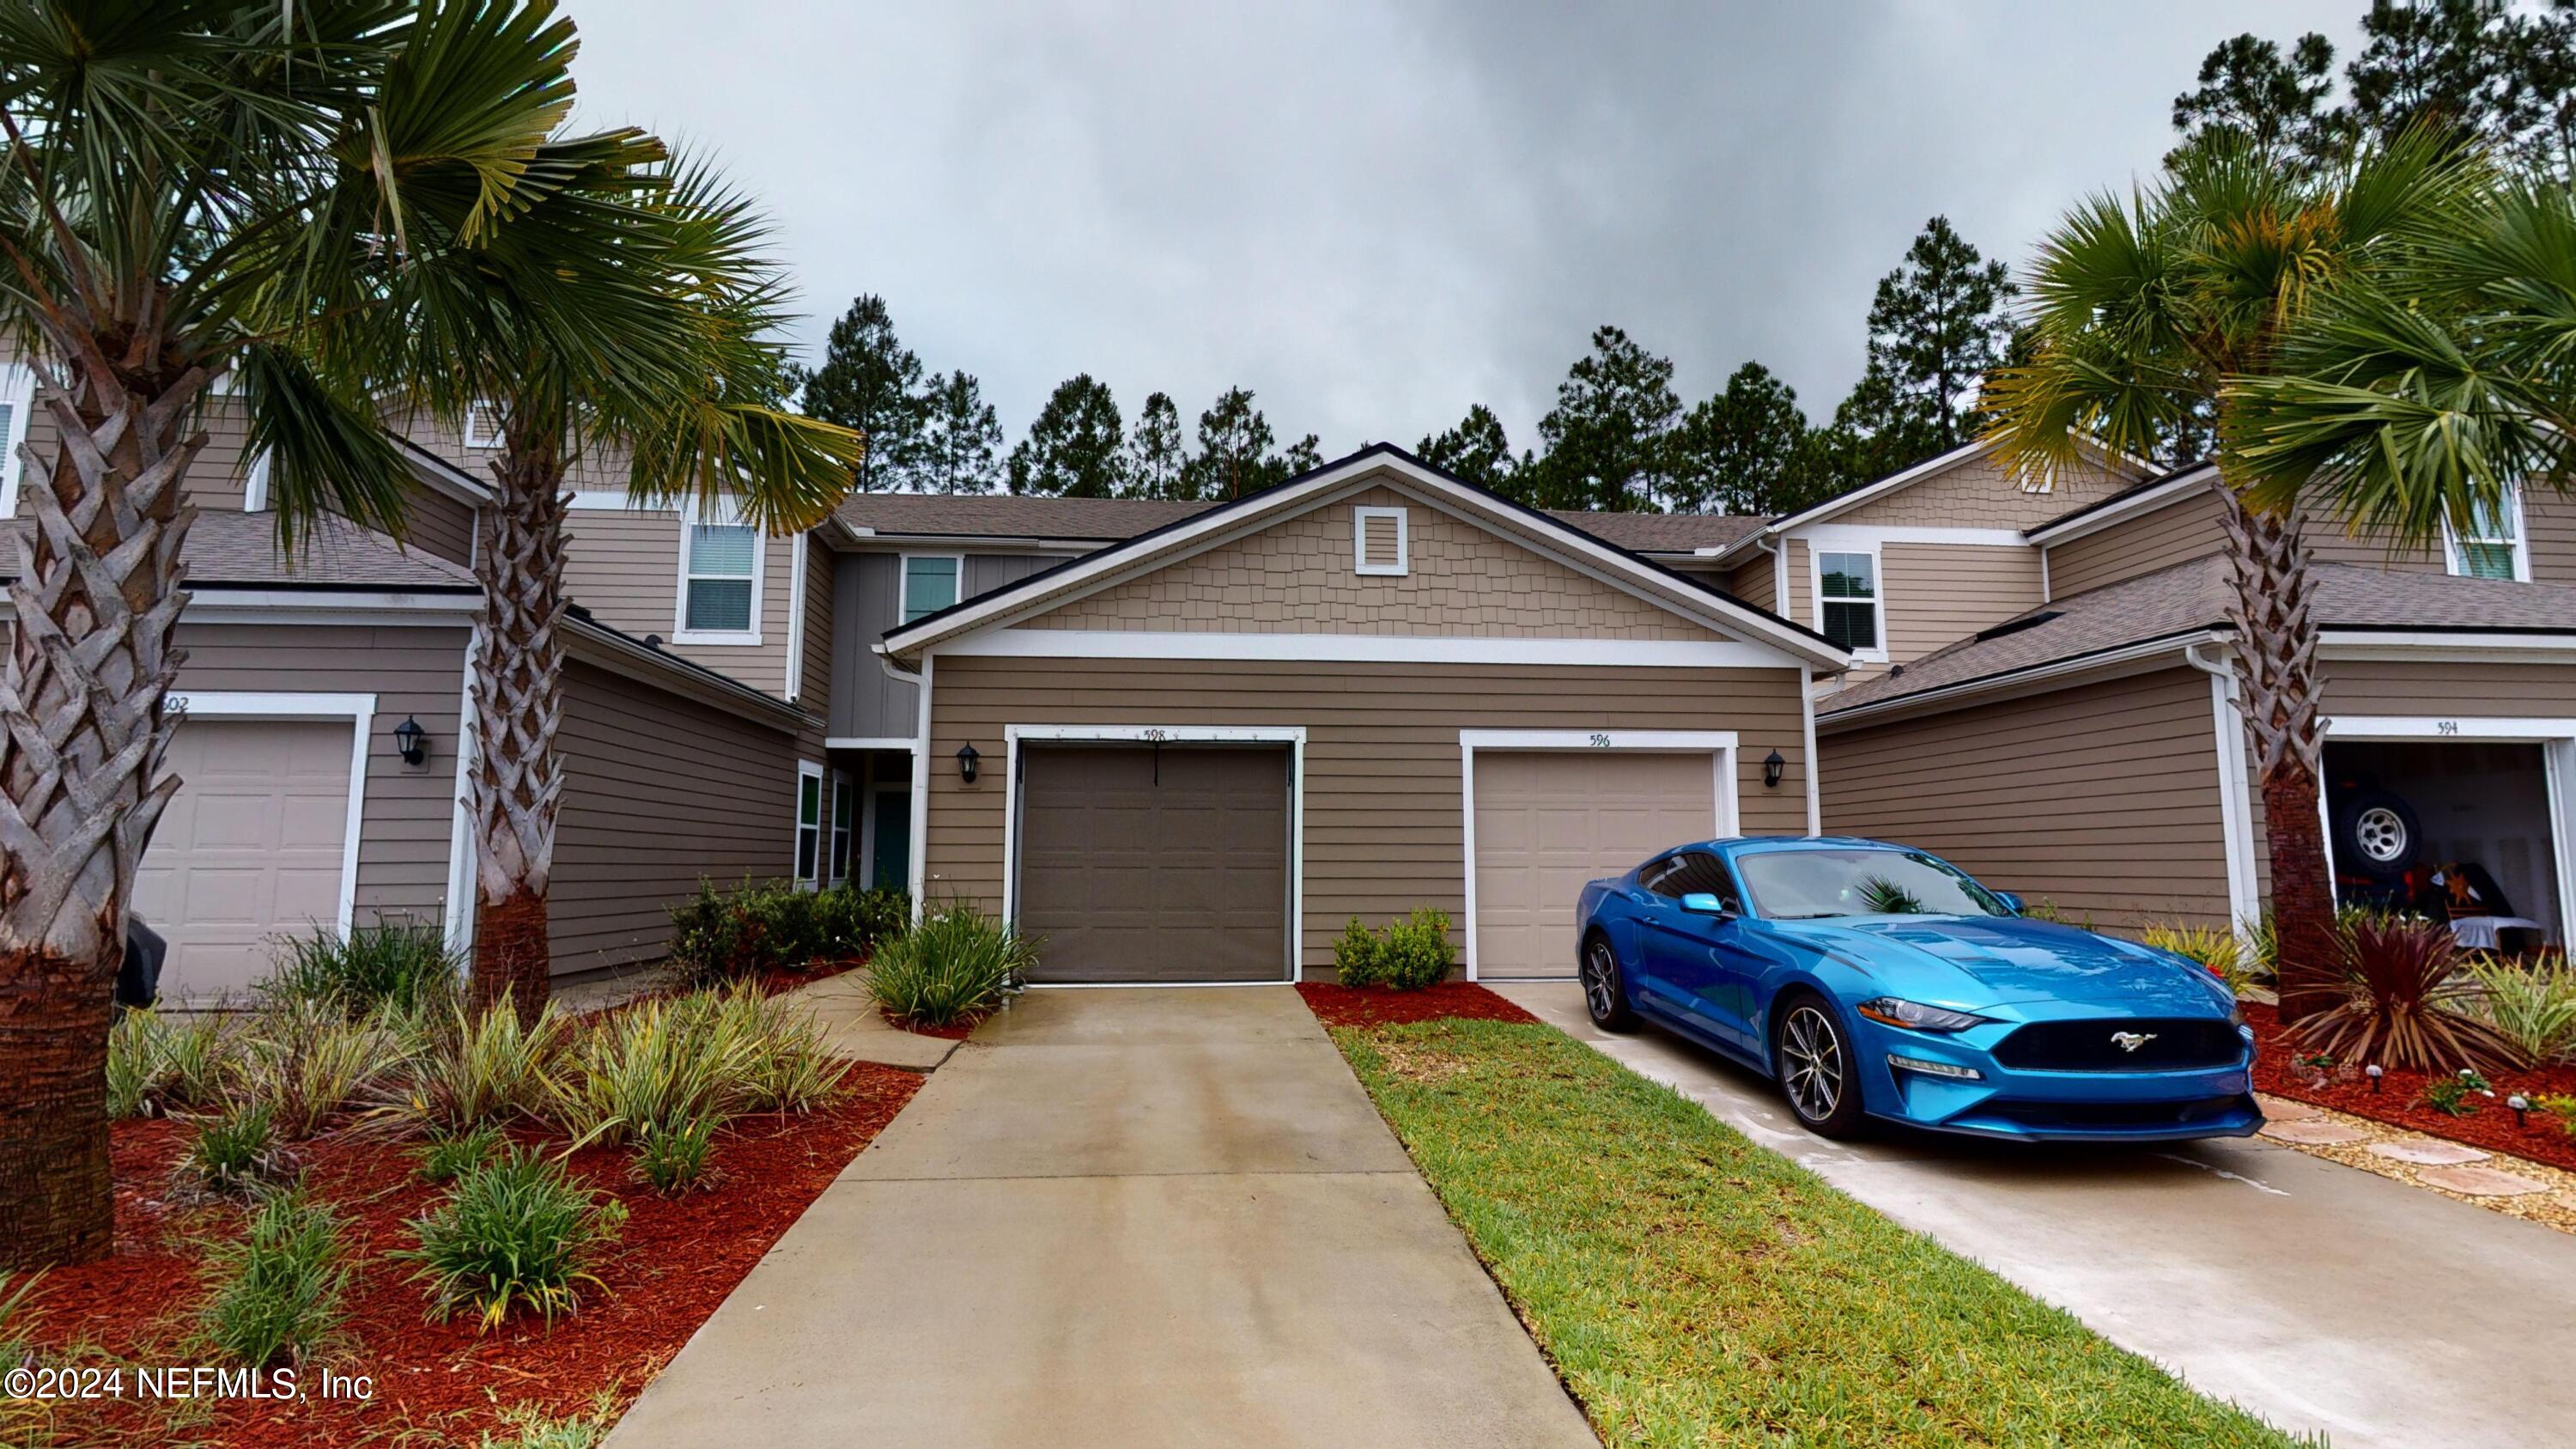 St Johns, FL home for sale located at 598 SERVIA Drive, St Johns, FL 32259